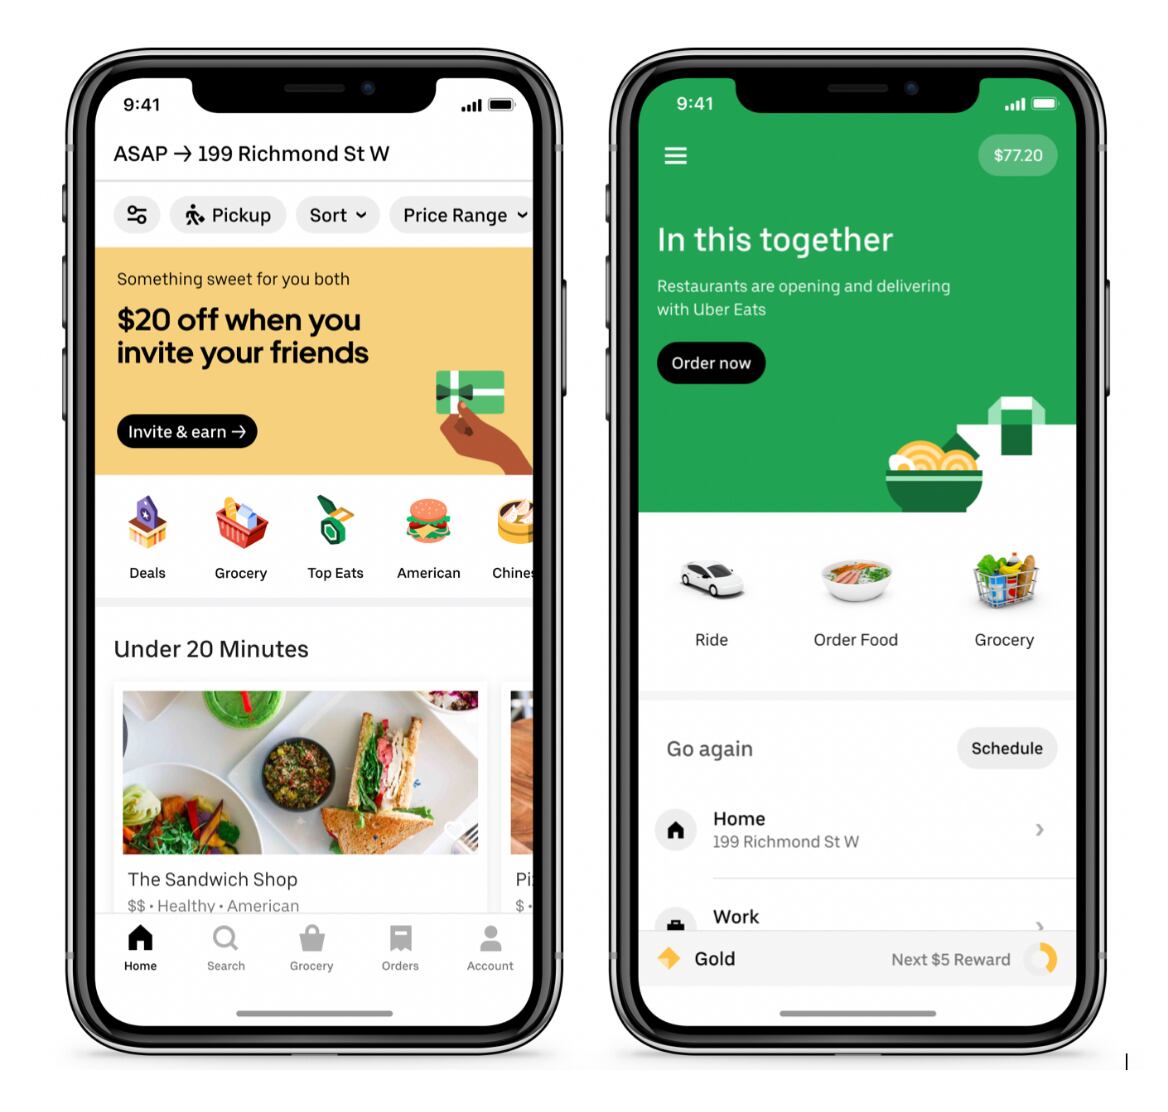 Uber's grocery delivery interface shown on iOS.